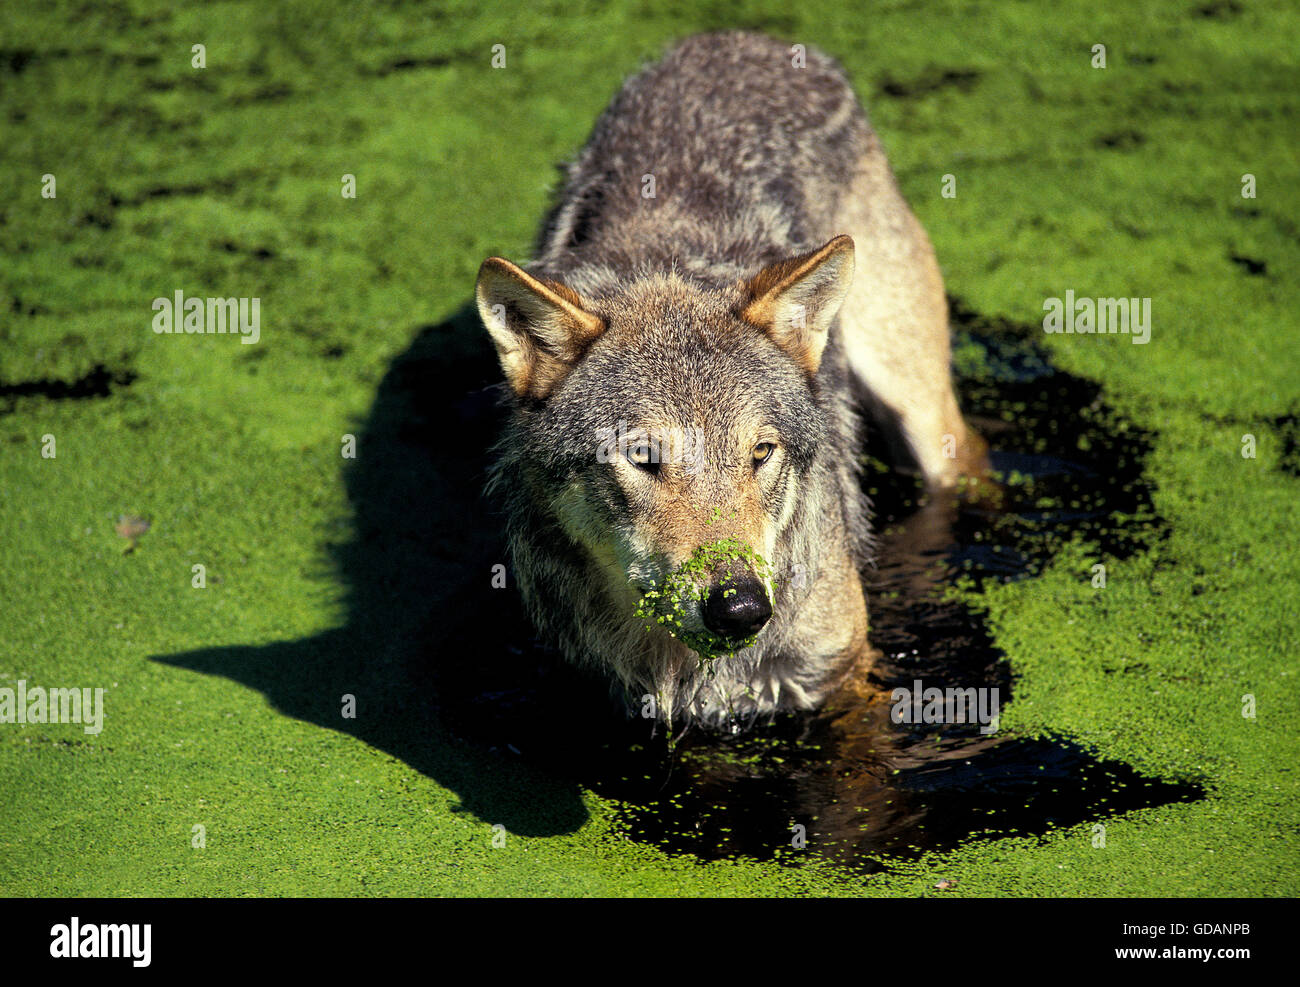 EUROPEAN WOLF canis lupus, ADULT IN WATER WITH DUCKWEEDS Stock Photo